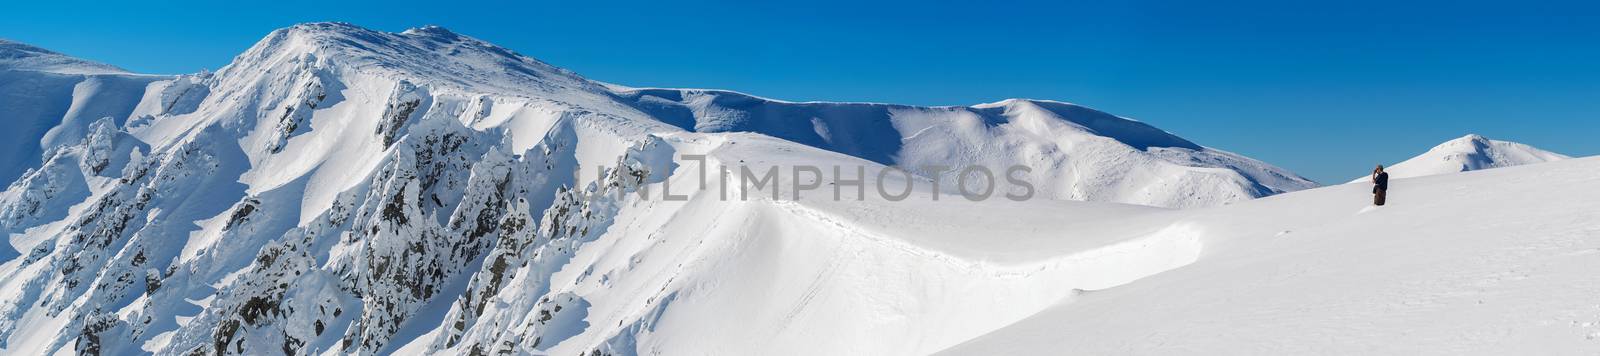 Panorama of snow-covered rocks of the mountain range. A man standing in the snow at the edge of the slope. The sky is clear, sunny. Winter. Ukraine